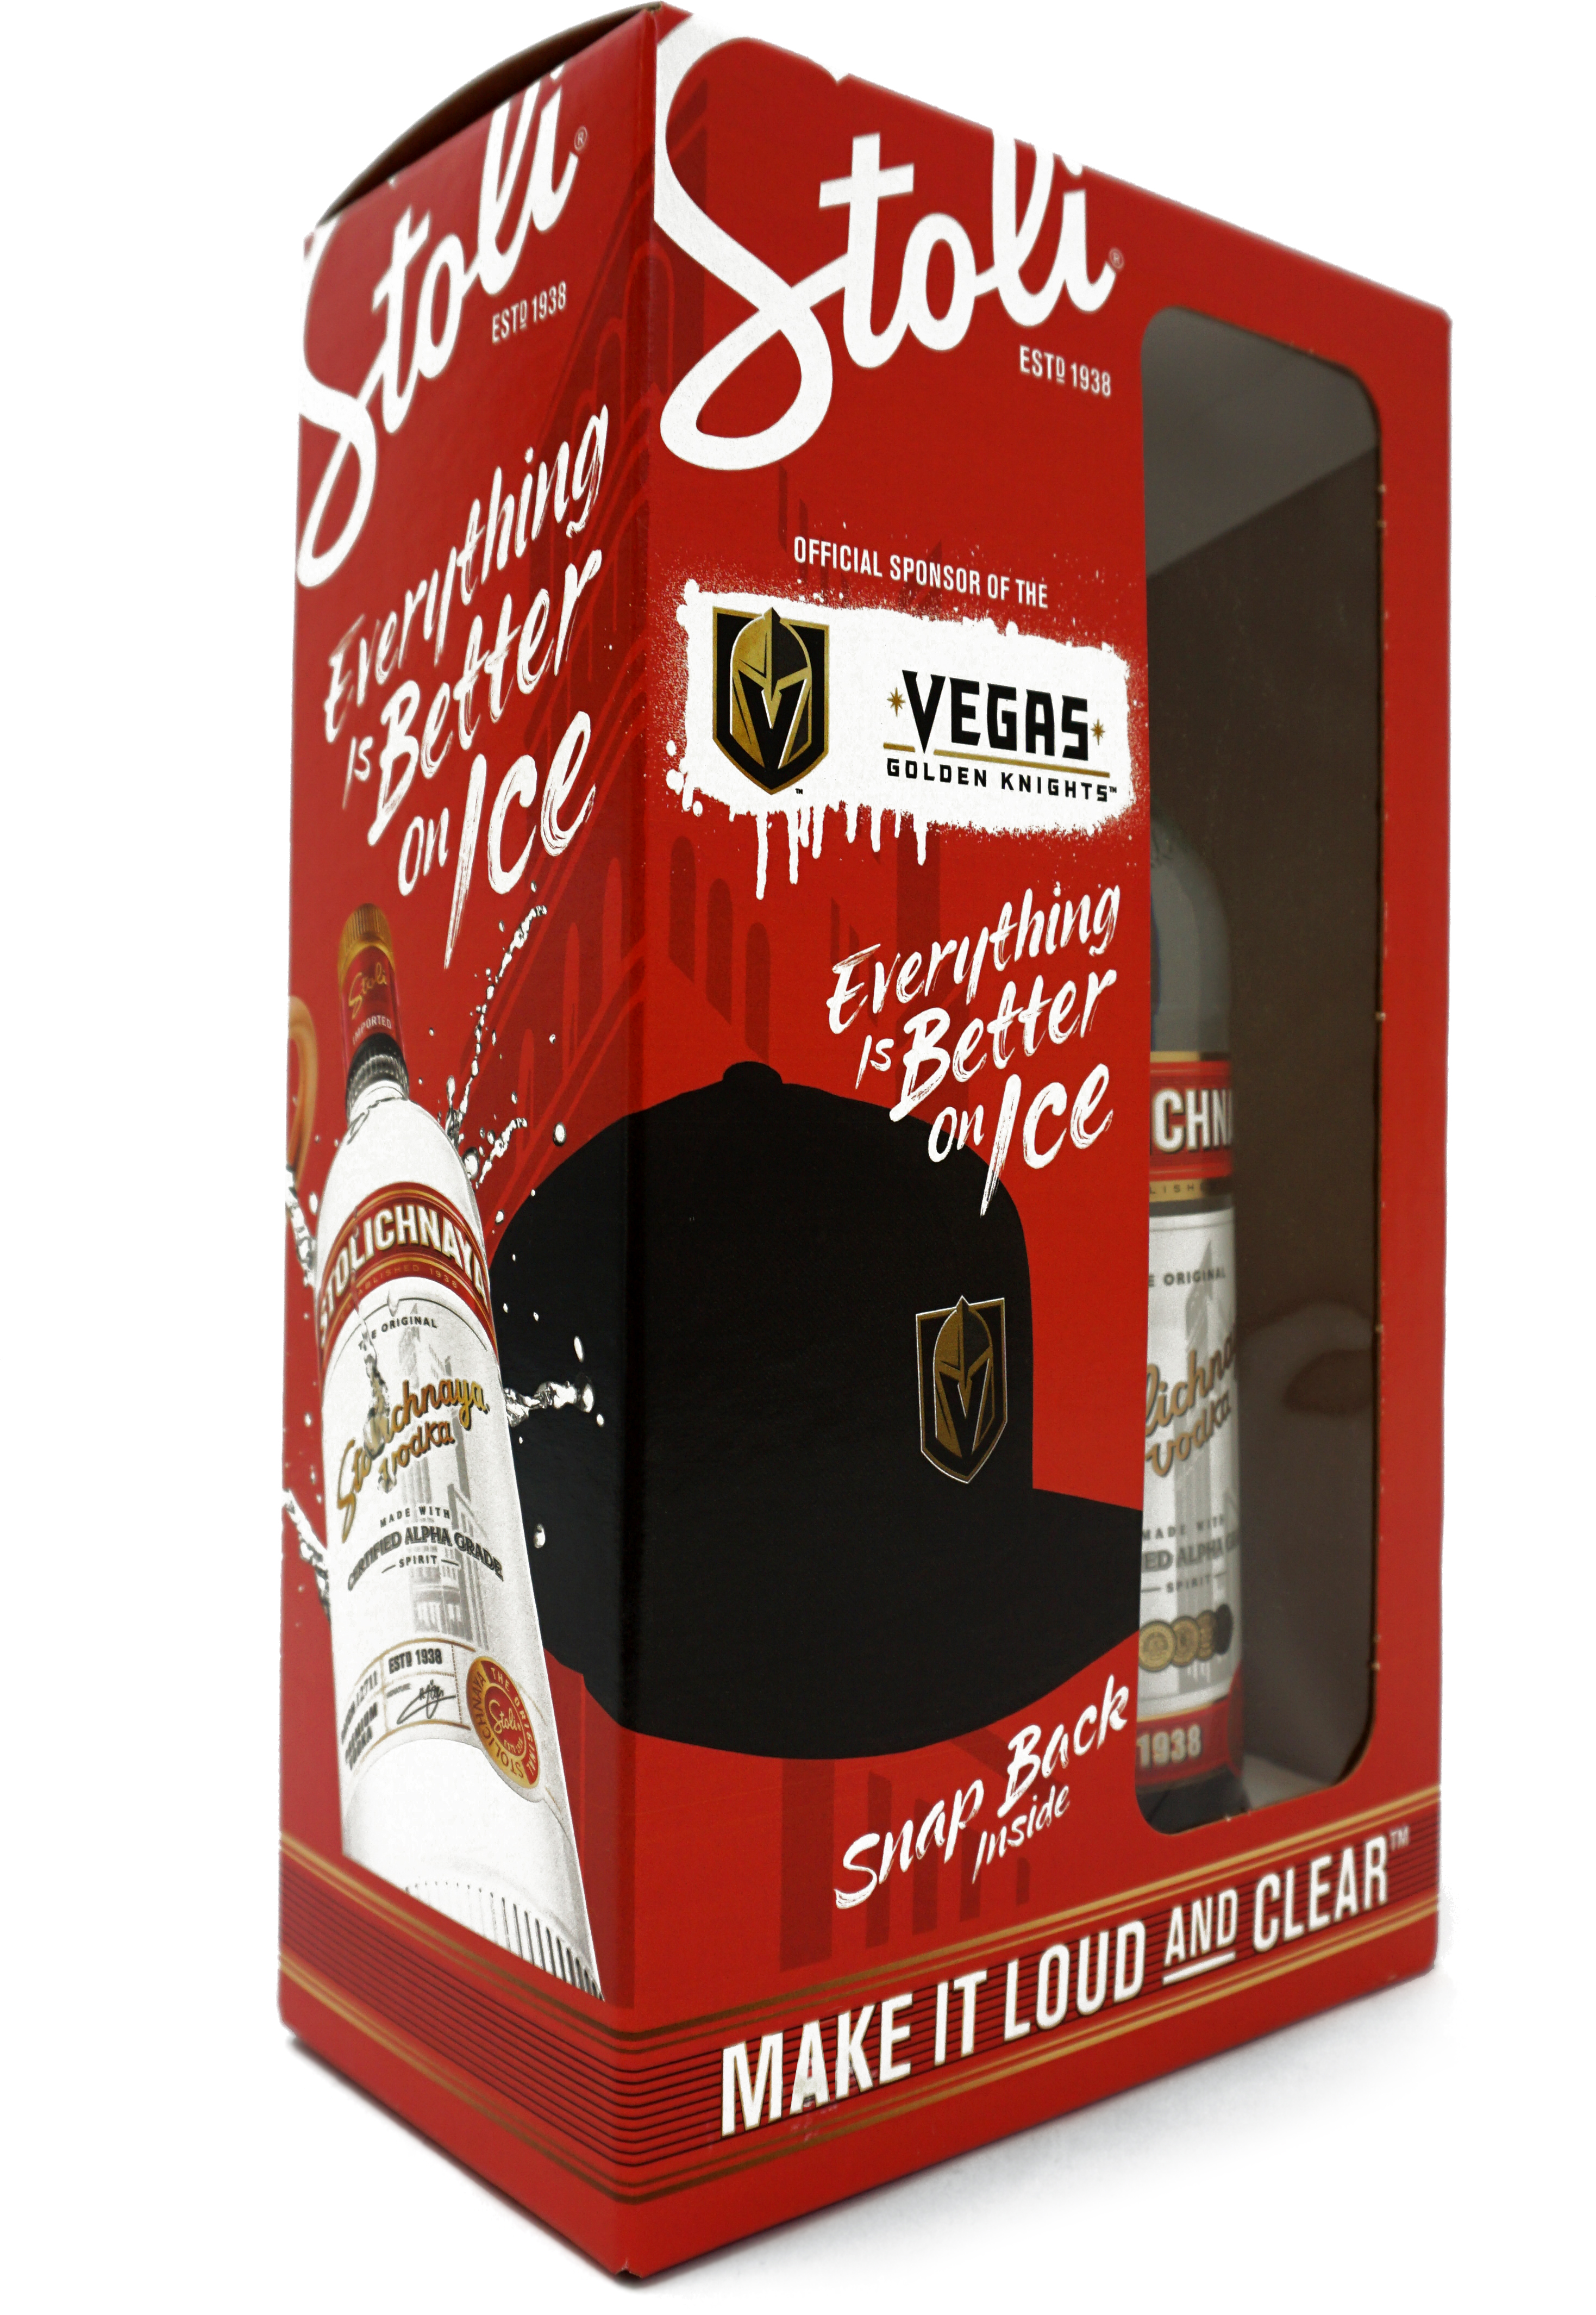 vodka gift with purchase packaging with cap